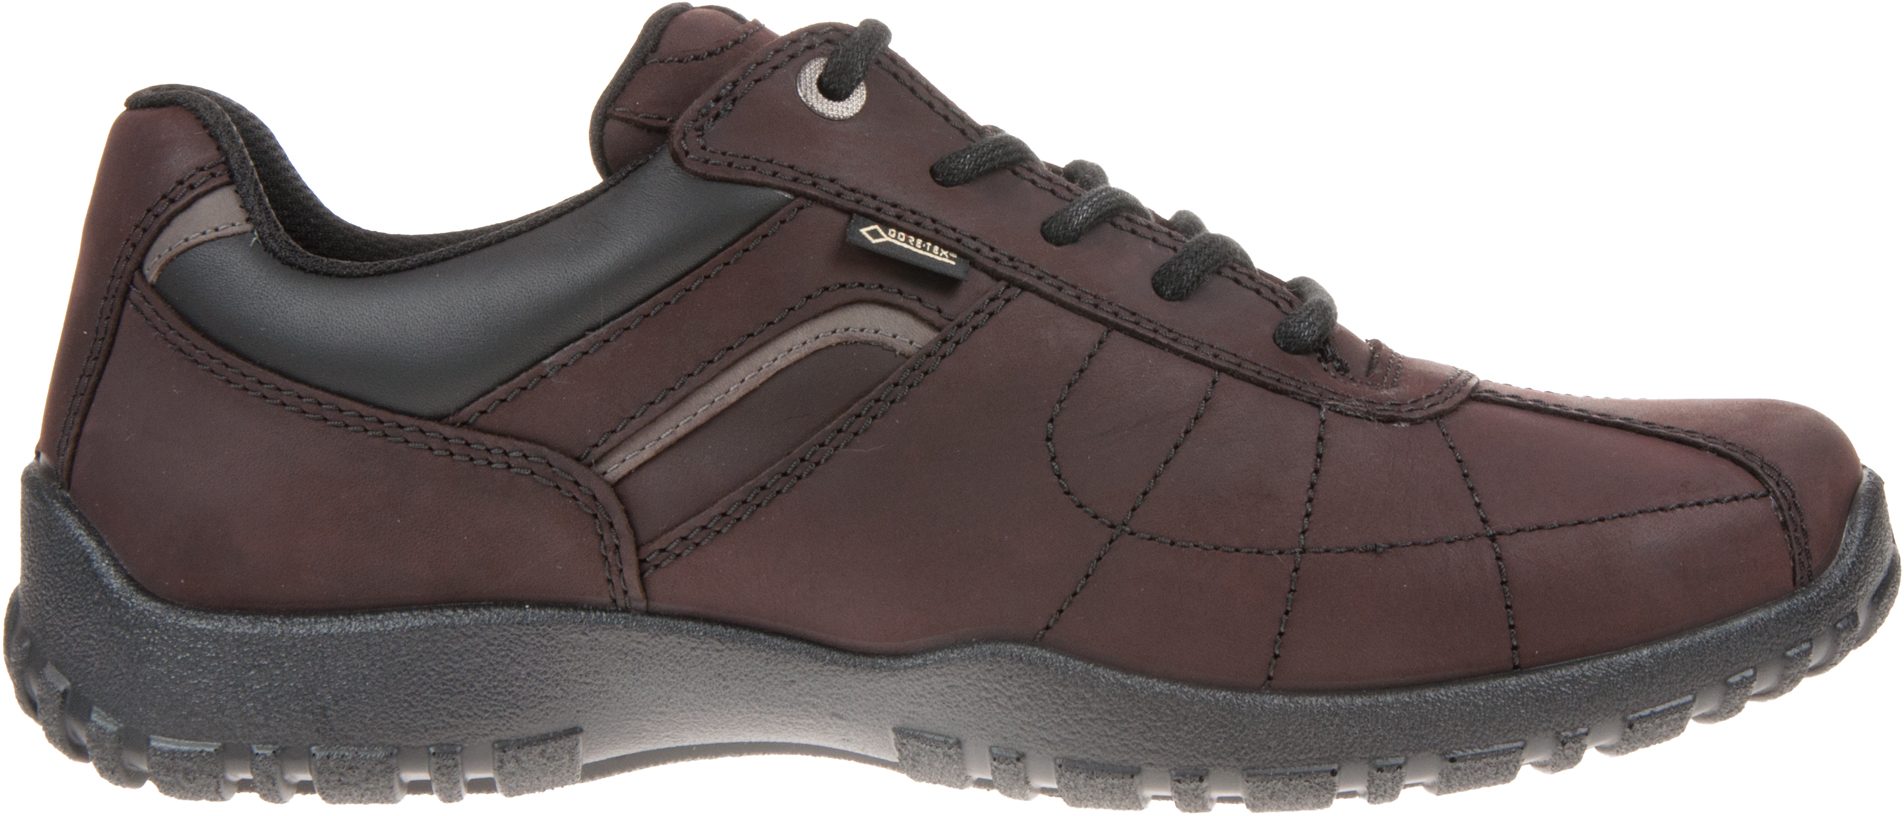 Hotter Thor Gore-Tex Chocolate - Casual Shoes - Humphries Shoes